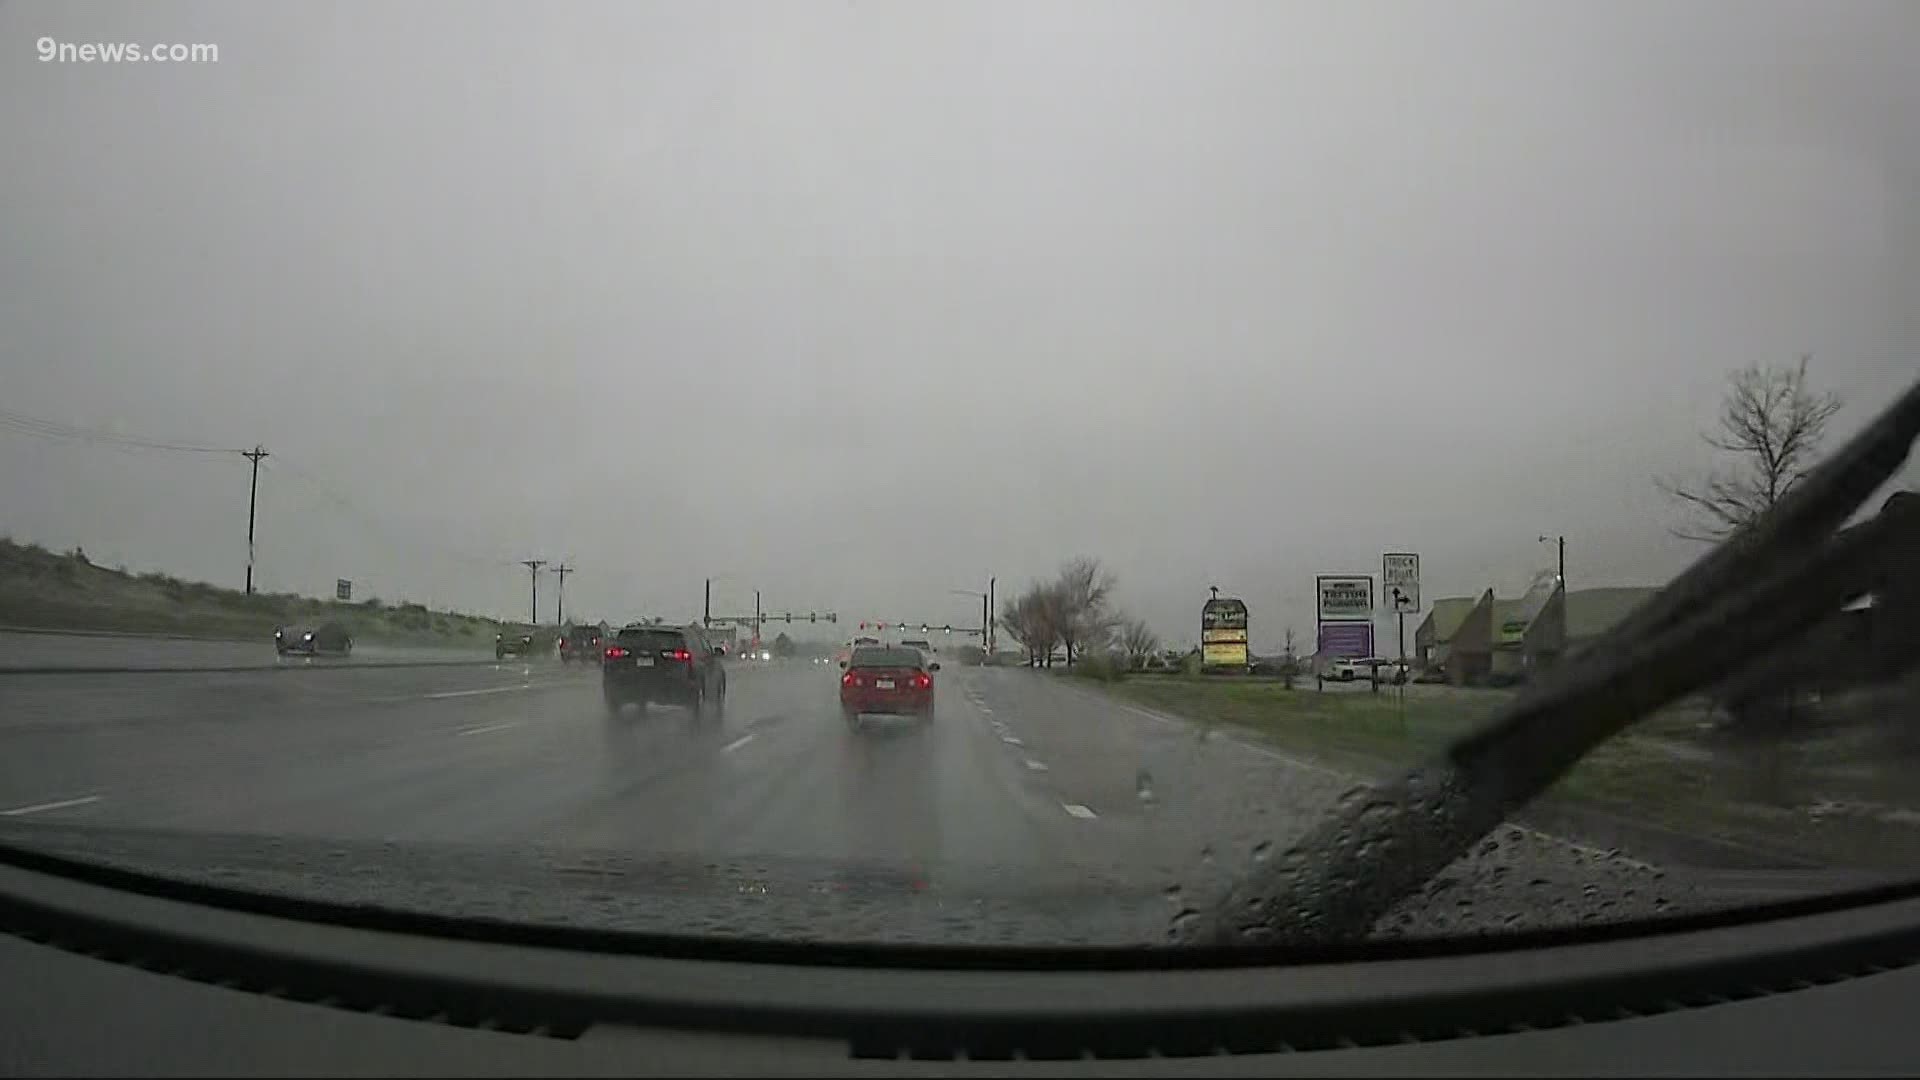 Jon Glasgow has a look at road conditions around the Denver metro area following a spring storm that arrived in the state.